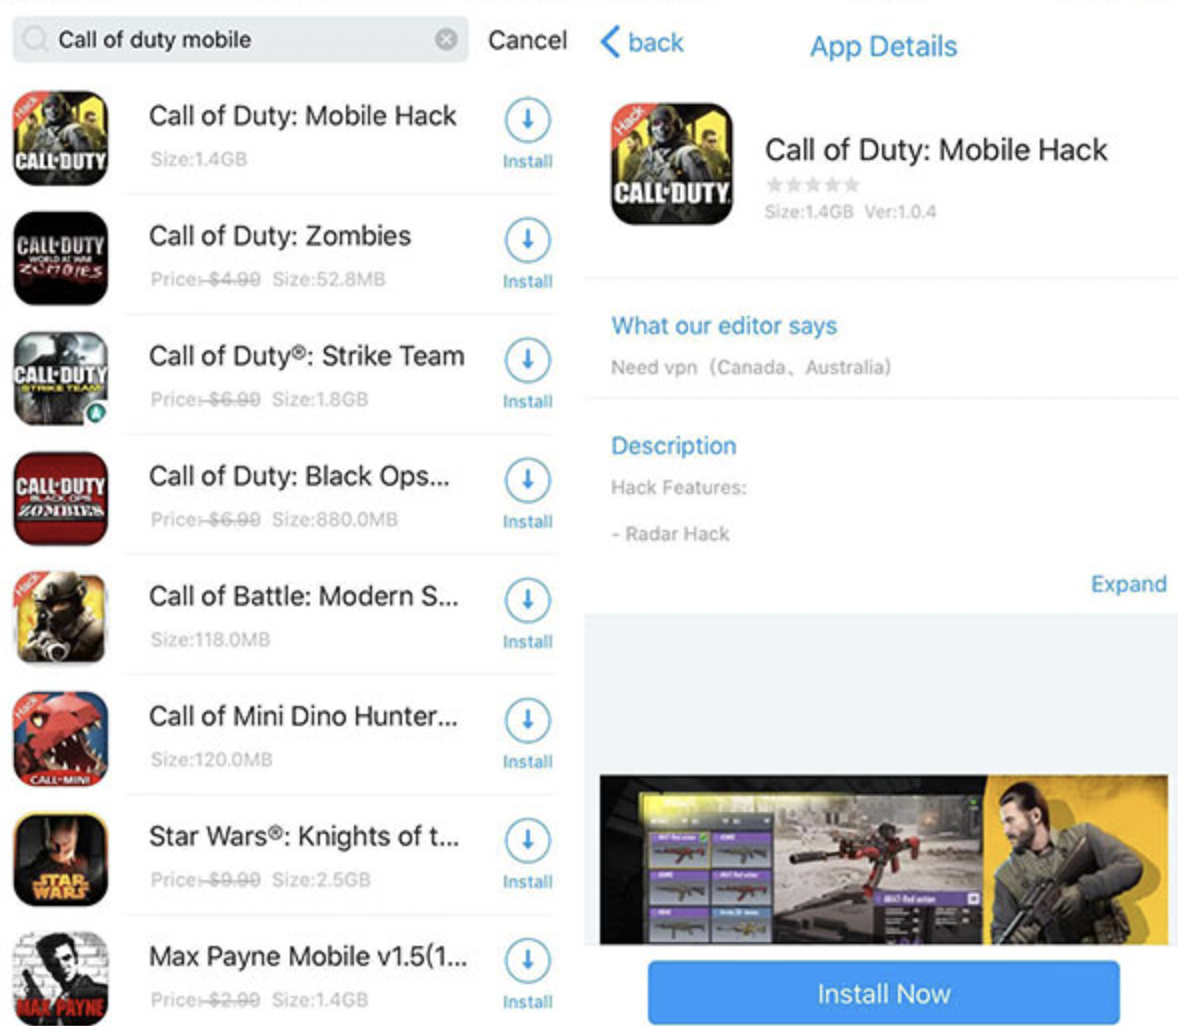 Search for Call of Duty Mobile Hack Game on iPhone and iPad